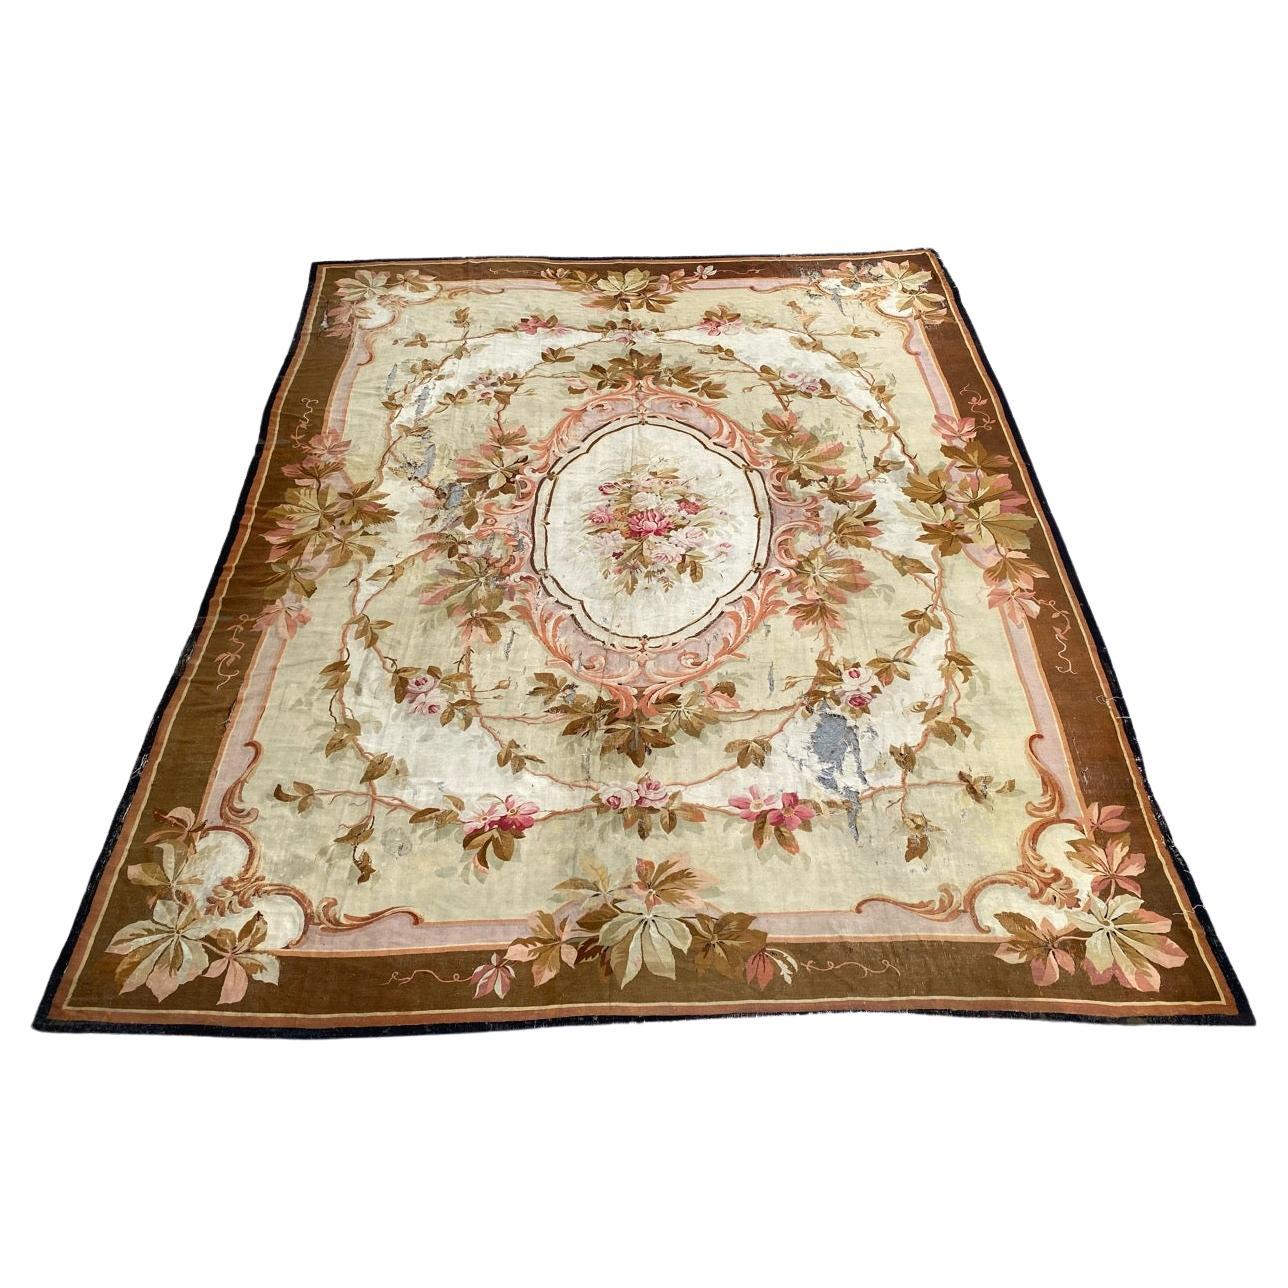 Bobyrug's Nice Distressed Large Antique Aubusson Flat Rug